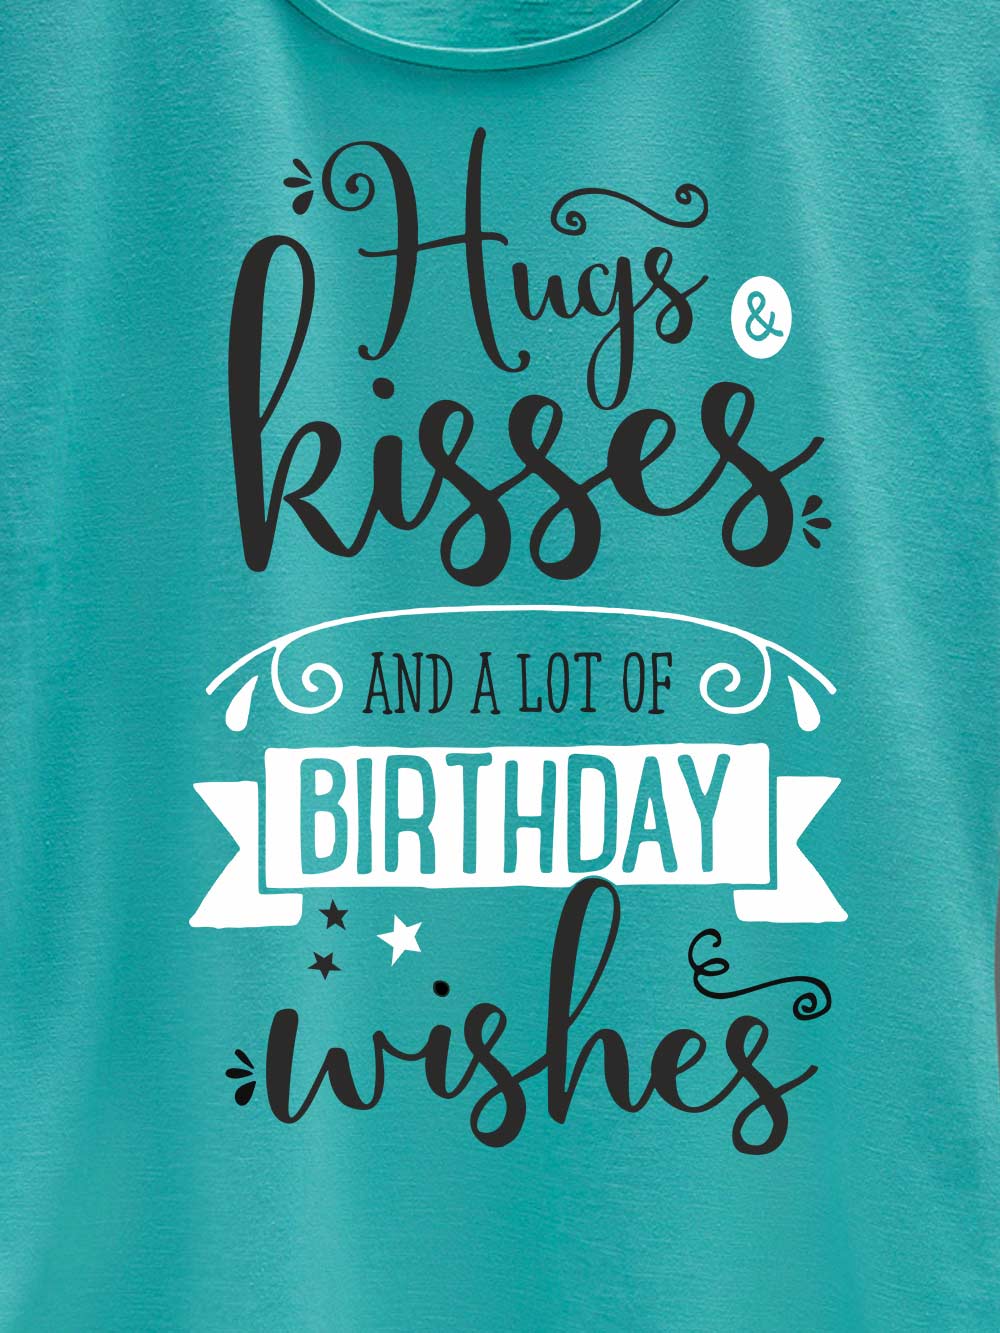 1. New Hugs and Kisses Women's Birthday T-shirt by Out of Order